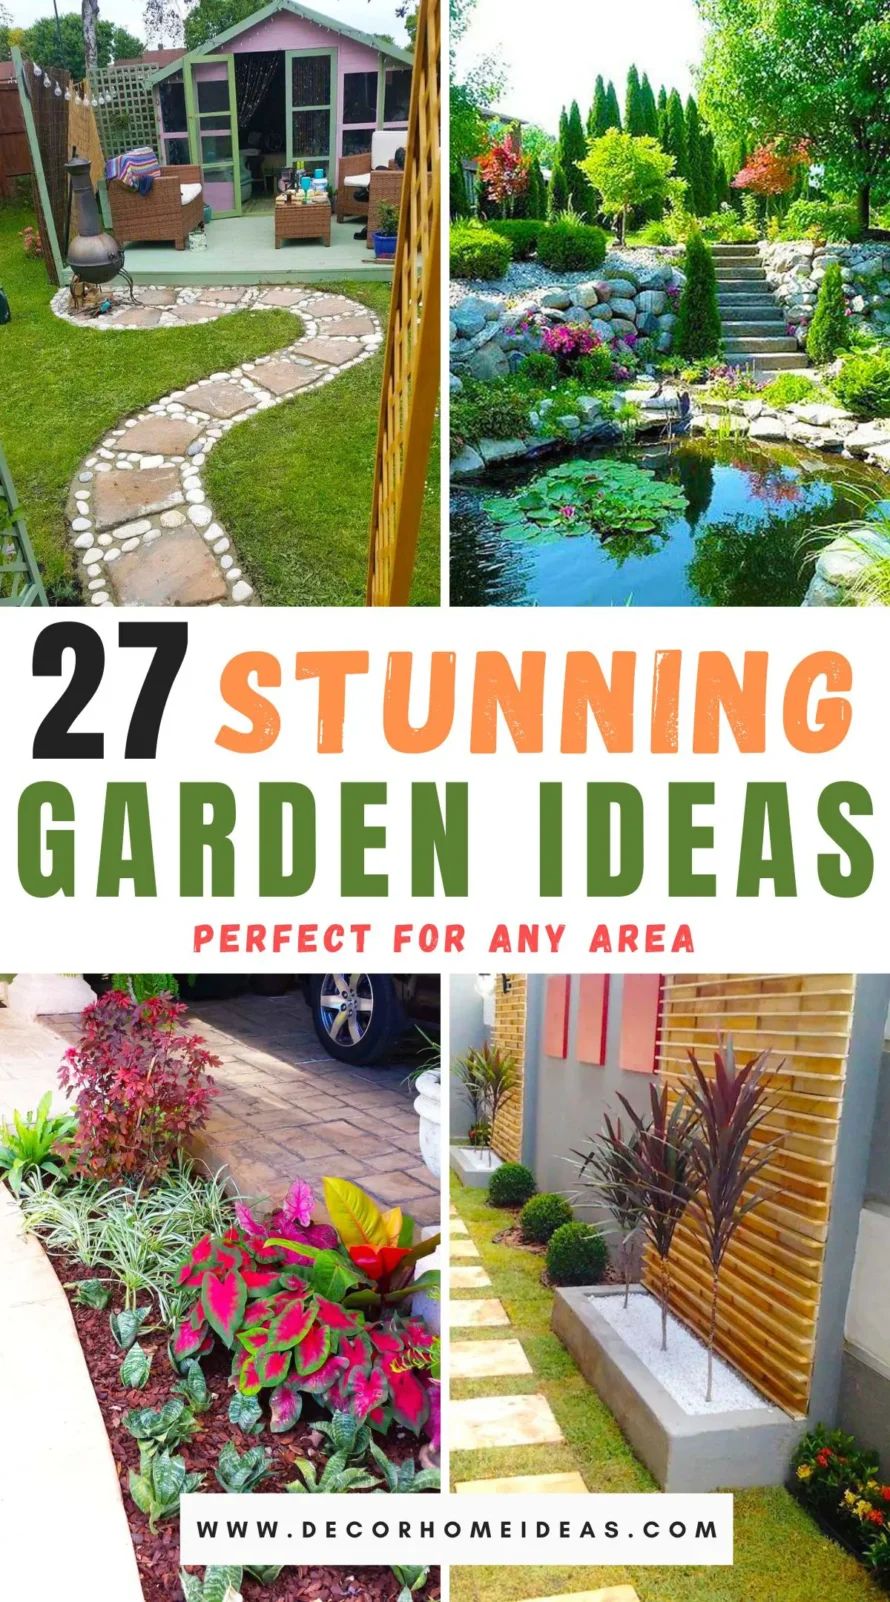 Discover 27 innovative garden ideas designed to enhance any space, large or small. From vertical gardens to creative water features, this post will inspire you to transform your outdoor area into a breathtaking oasis. Dive in to learn more!